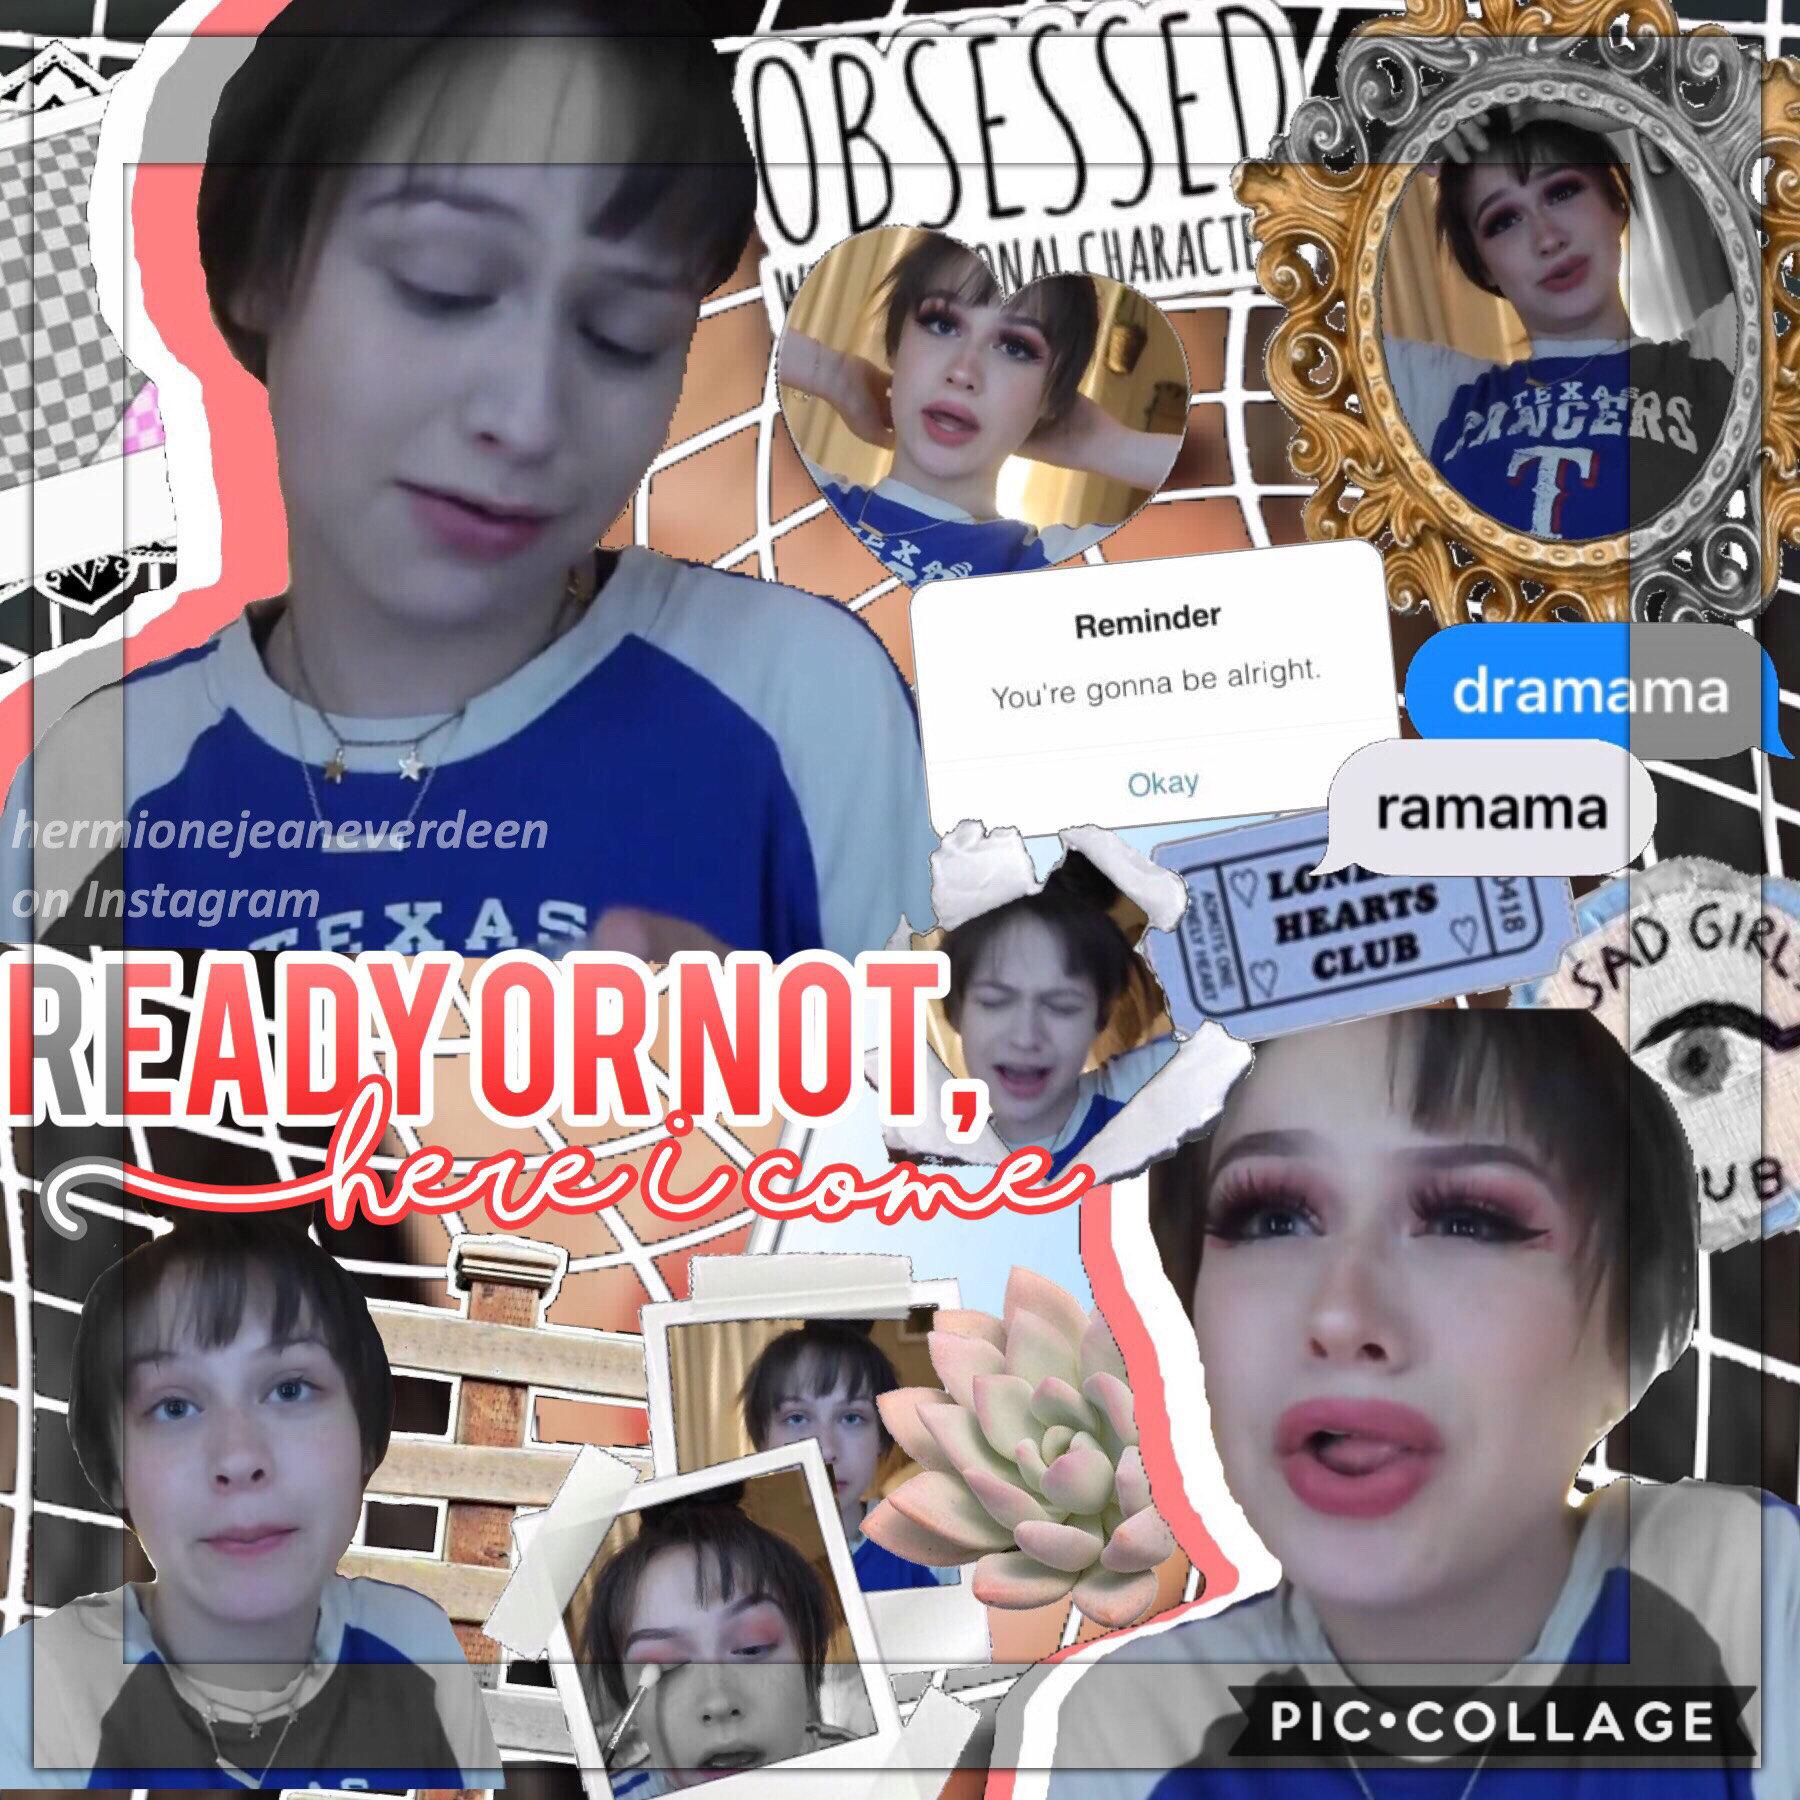 tap
this edit is of Haley Morales, she’s a YouTuber and I think she’s very underrated, go check out her channel(it’s Haley Morales)
QOTD: Is there anyone interested in joining my fandom games? One person left PC and their door needs to be filled